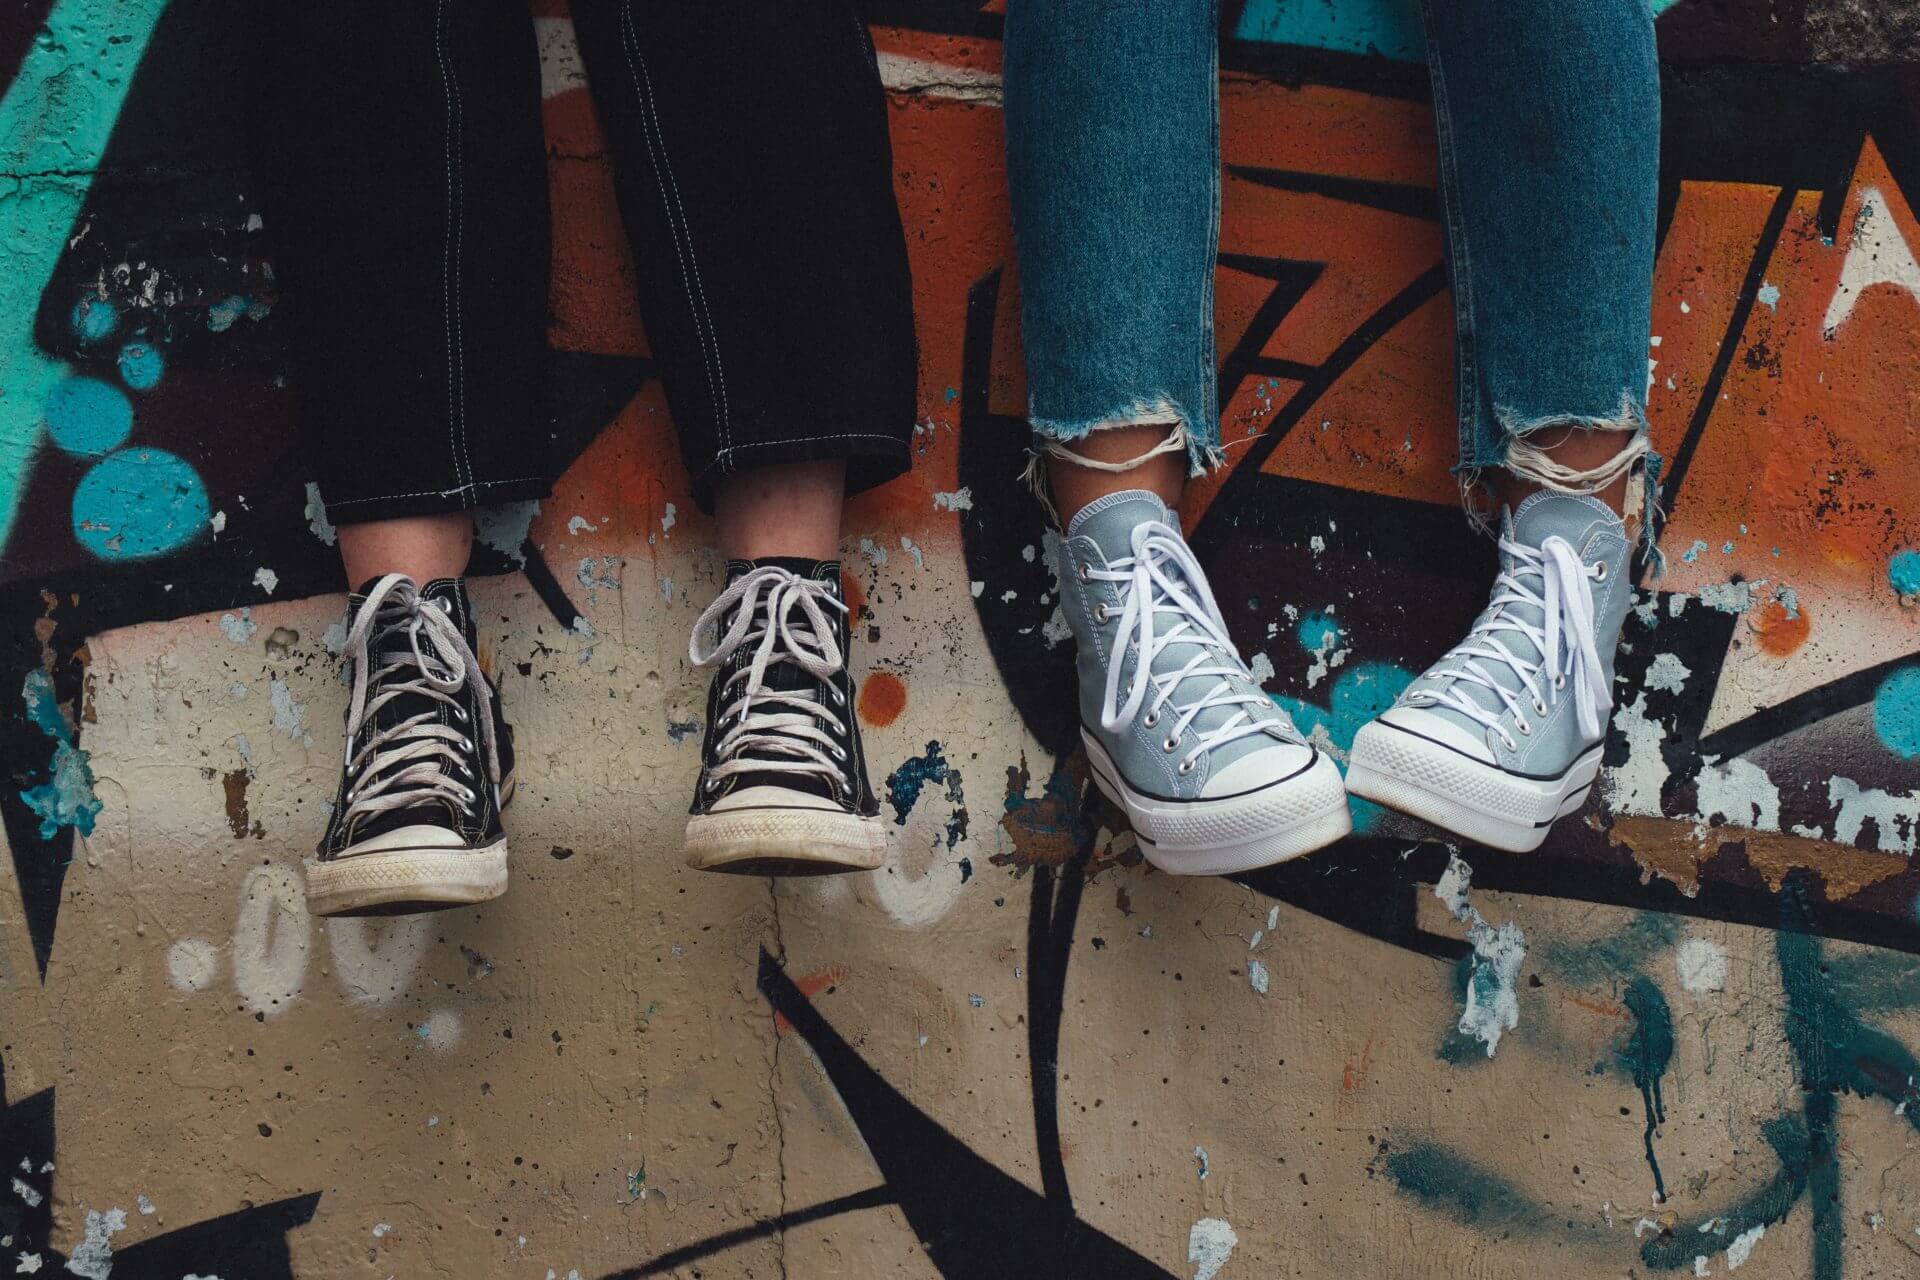 image of the lower legs and feet of two young people wearing jeans and sneakers